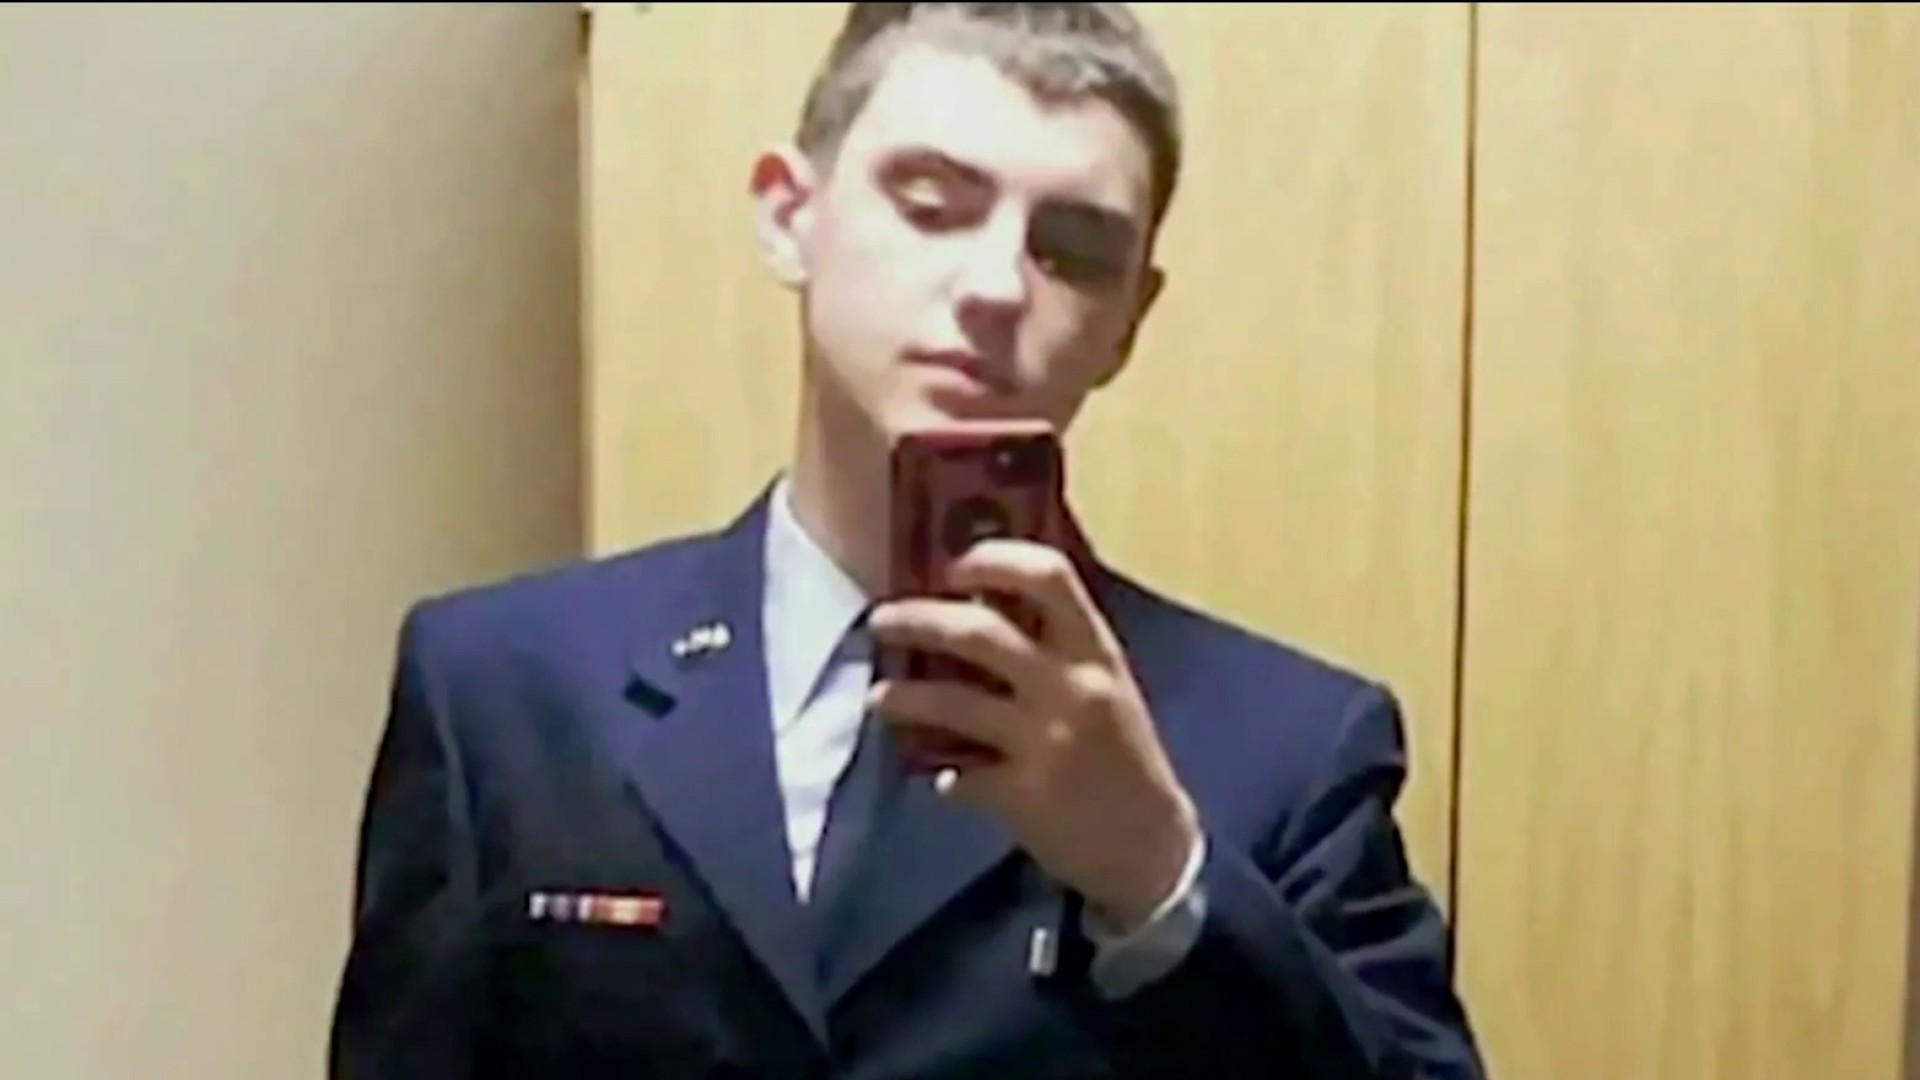 Pentagon leak suspect Jack Teixeira expected to plead guilty in federal case